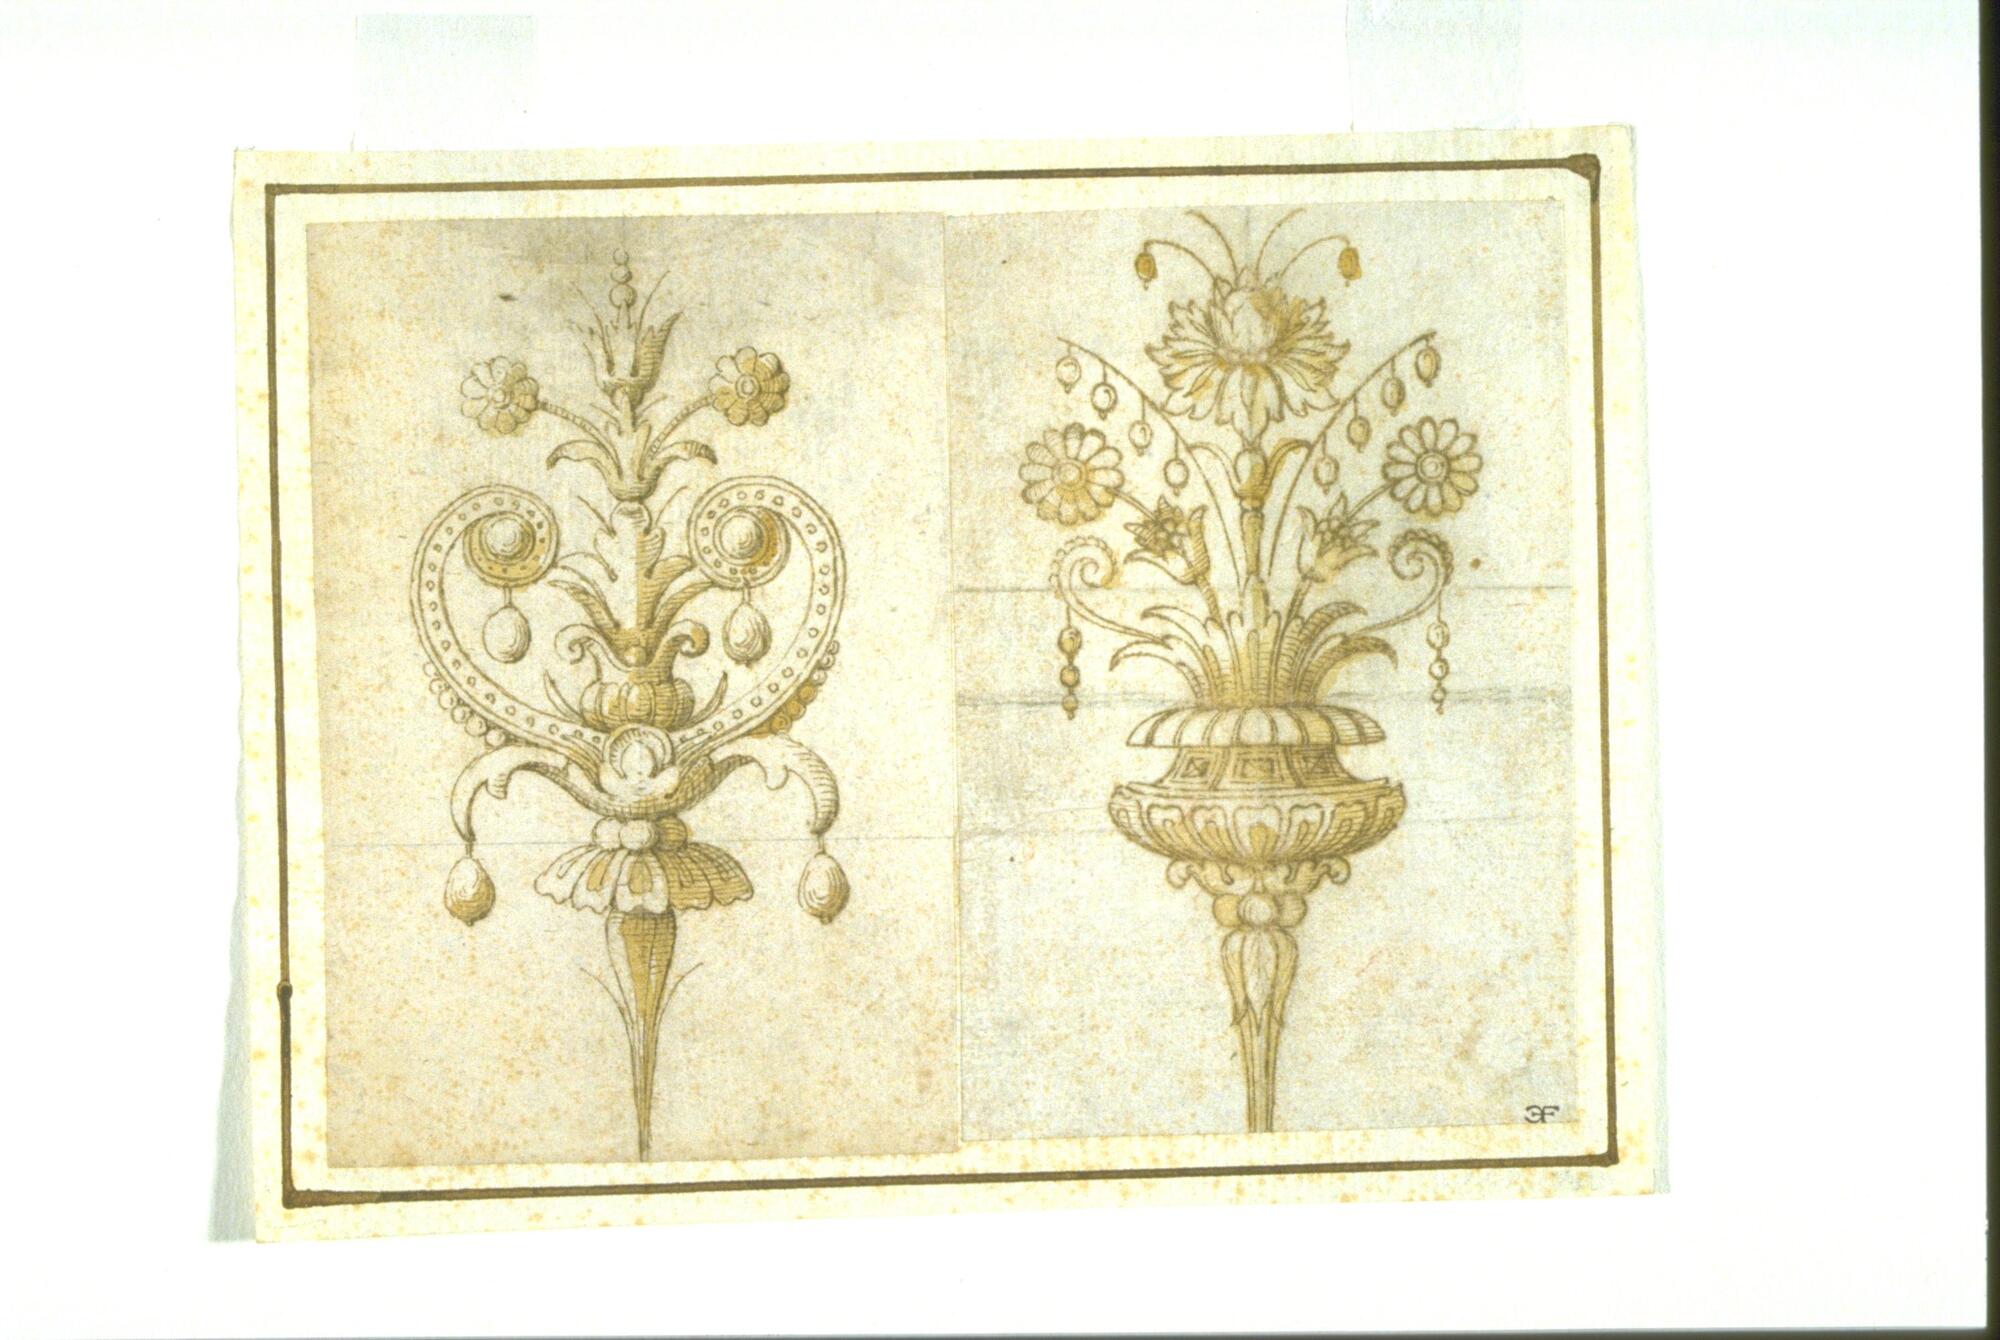 Two vertical designs dominate the drawing. Natural forms such as vines and other vegetal forms create designs that are symmetrical and organized around a central vertical axis.